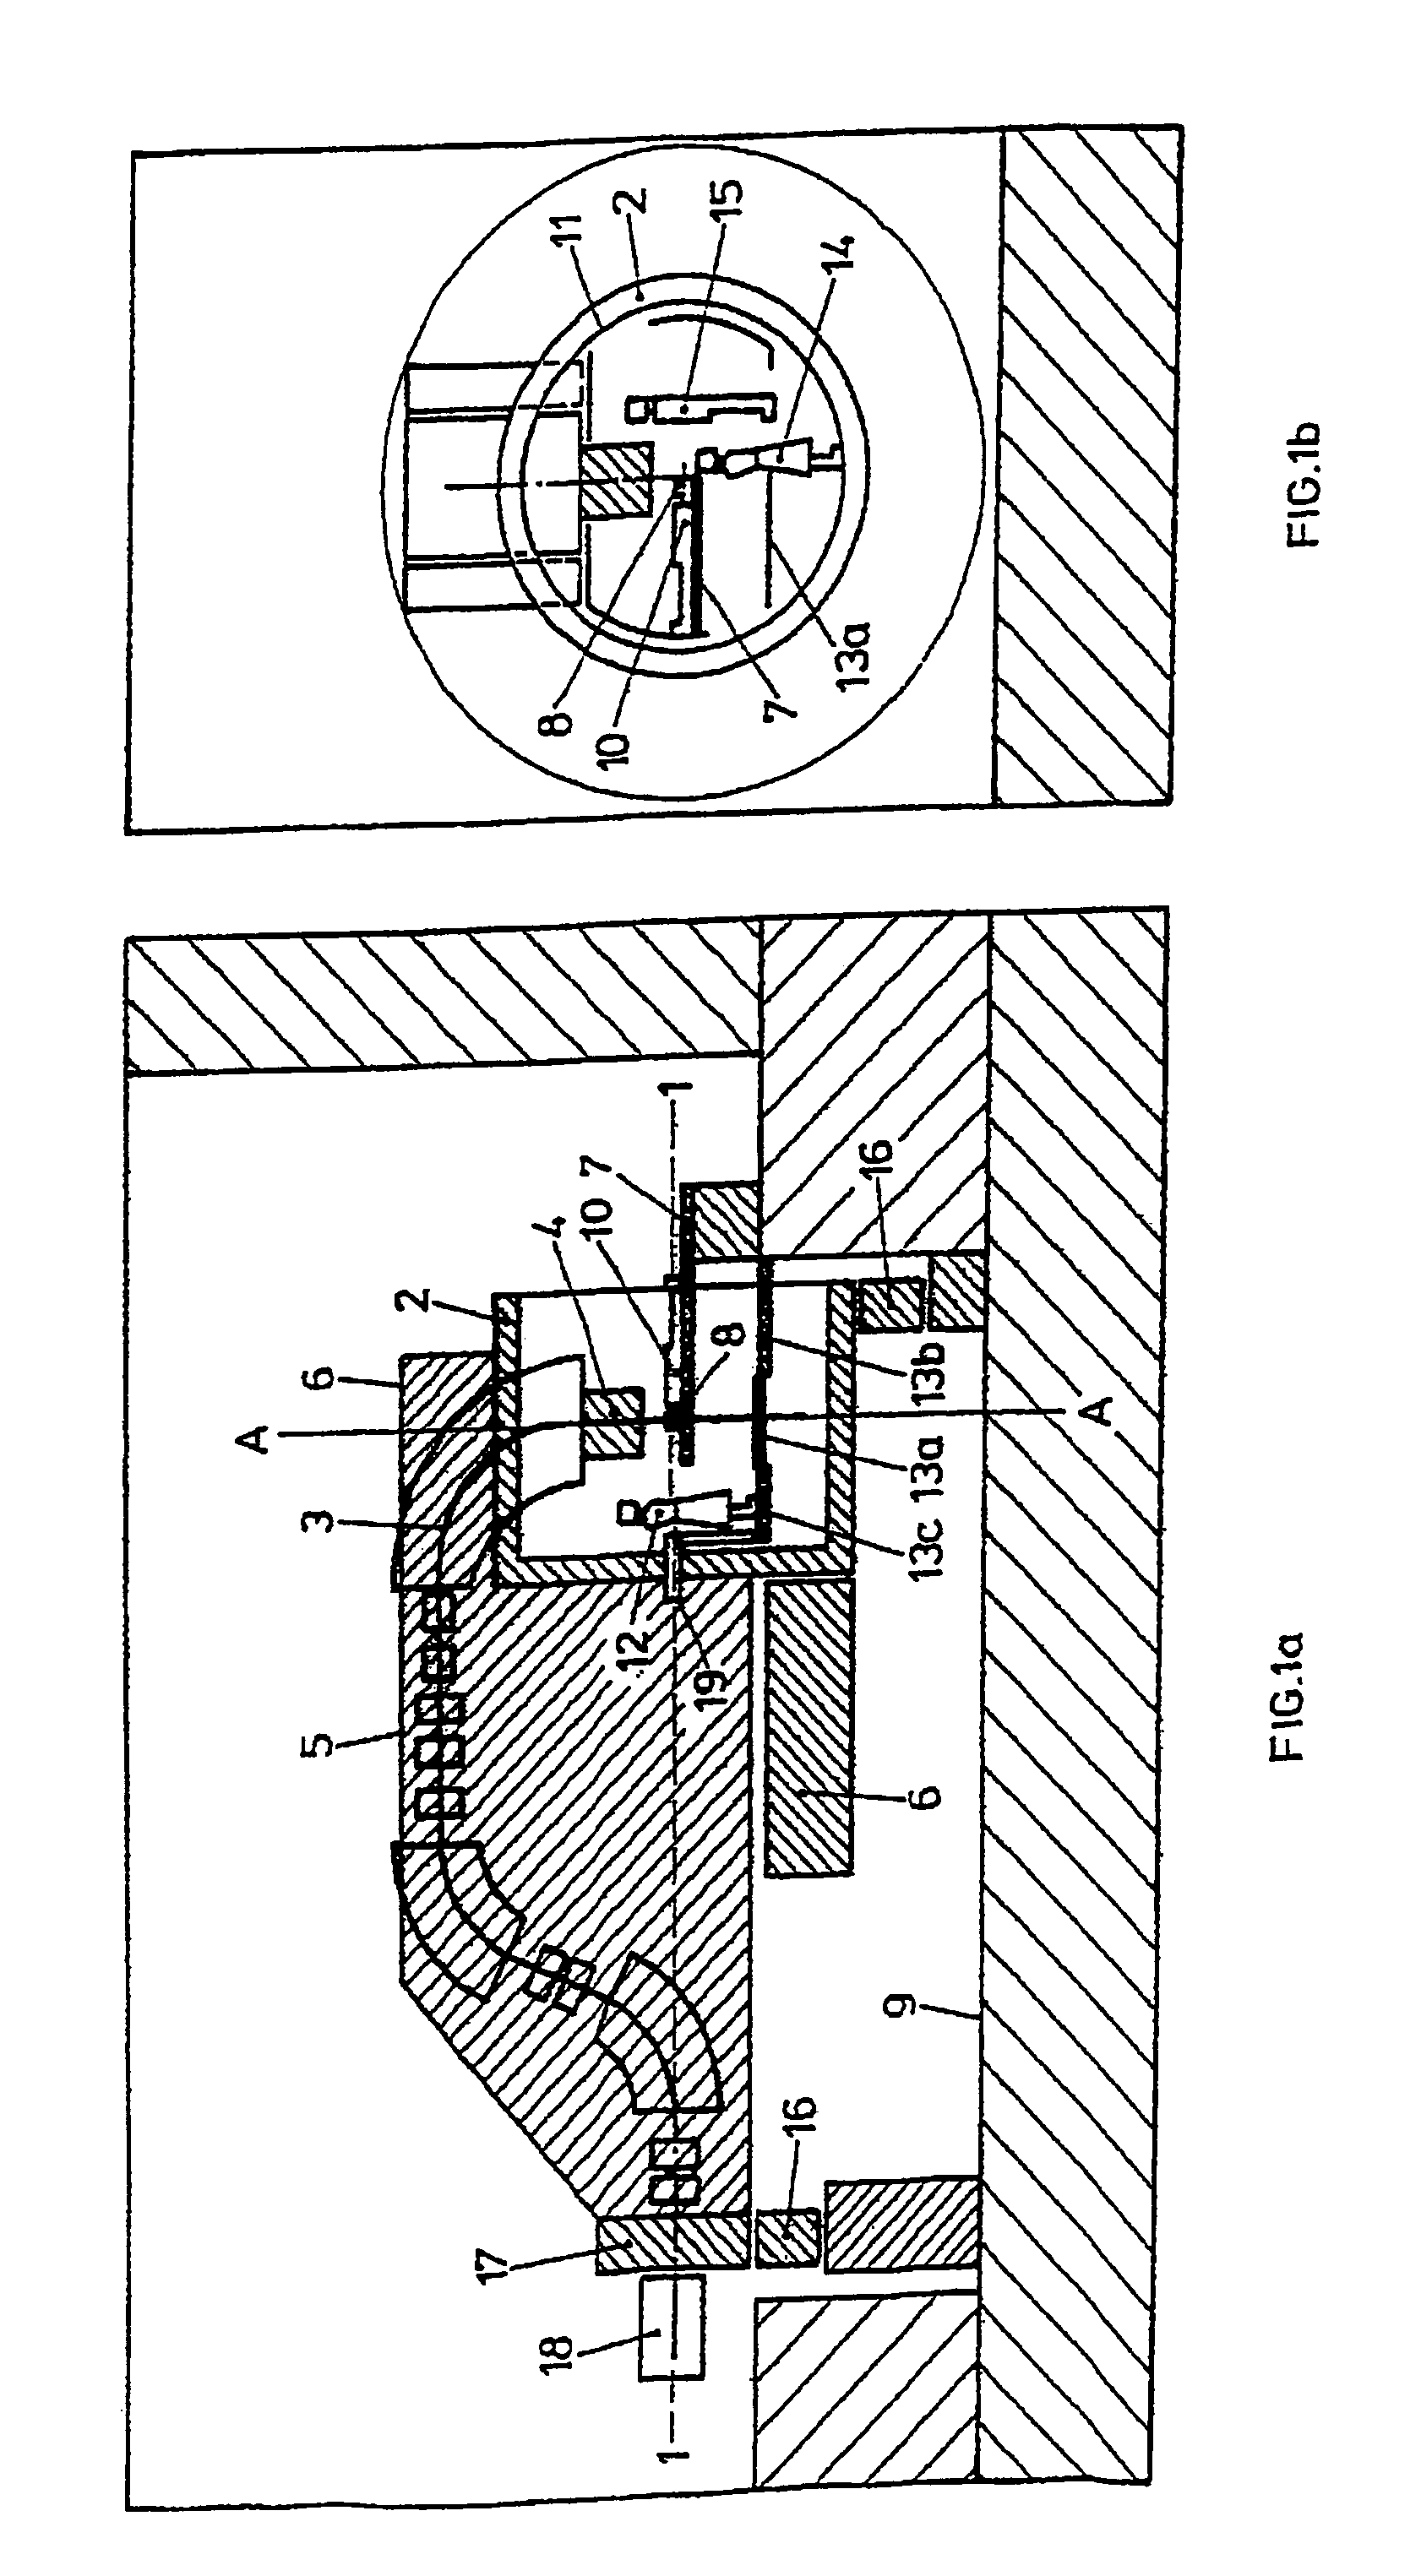 Arrangement for performing proton therapy